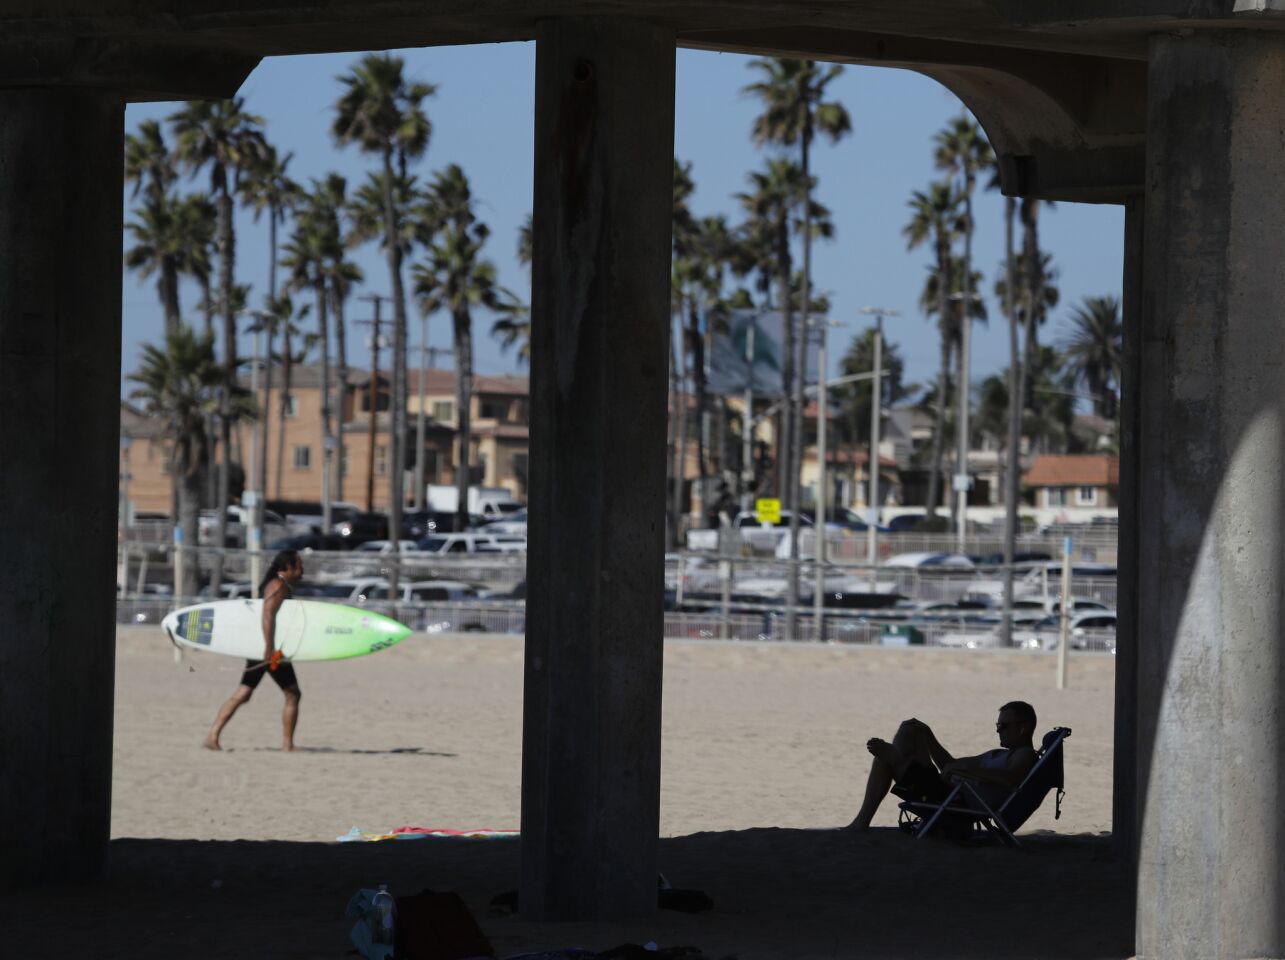 Jim Dodd of Huntington Beach relaxes in the shade under the Huntington Beach Pier as a surfer heads across the beach after riding large Santa Ana wind-swept waves amid 104-degree temperatures in Huntington Beach on Tuesday.